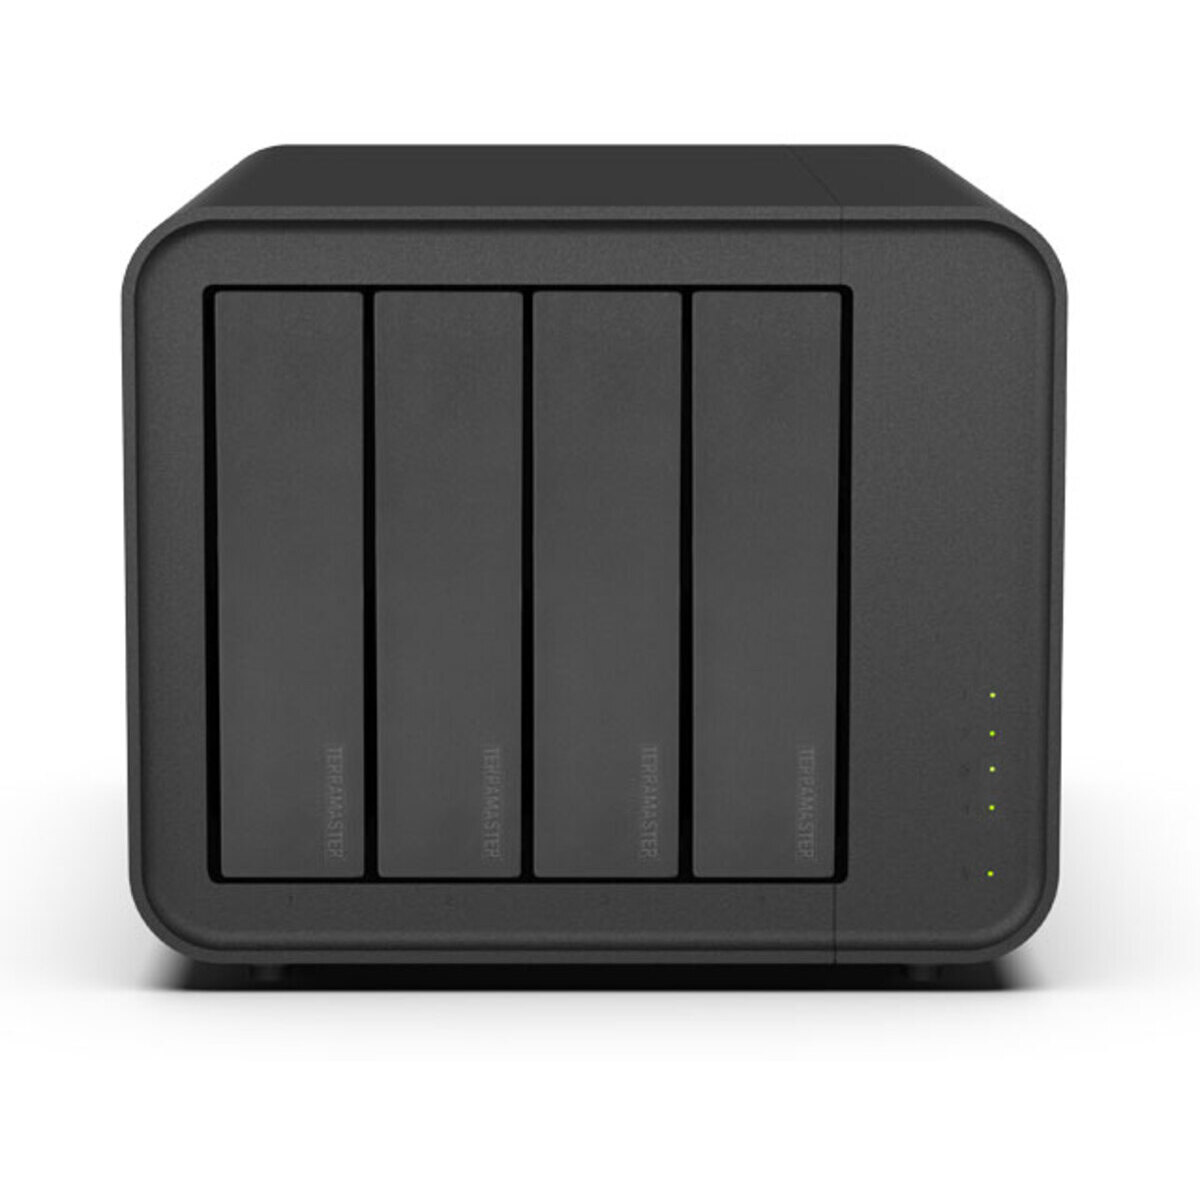 TerraMaster F4-424 PRO 16tb 4-Bay Desktop Multimedia / Power User / Business NAS - Network Attached Storage Device 4x4tb Sandisk Ultra 3D SDSSDH3-4T00 2.5 560/520MB/s SATA 6Gb/s SSD CONSUMER Class Drives Installed - Burn-In Tested F4-424 PRO